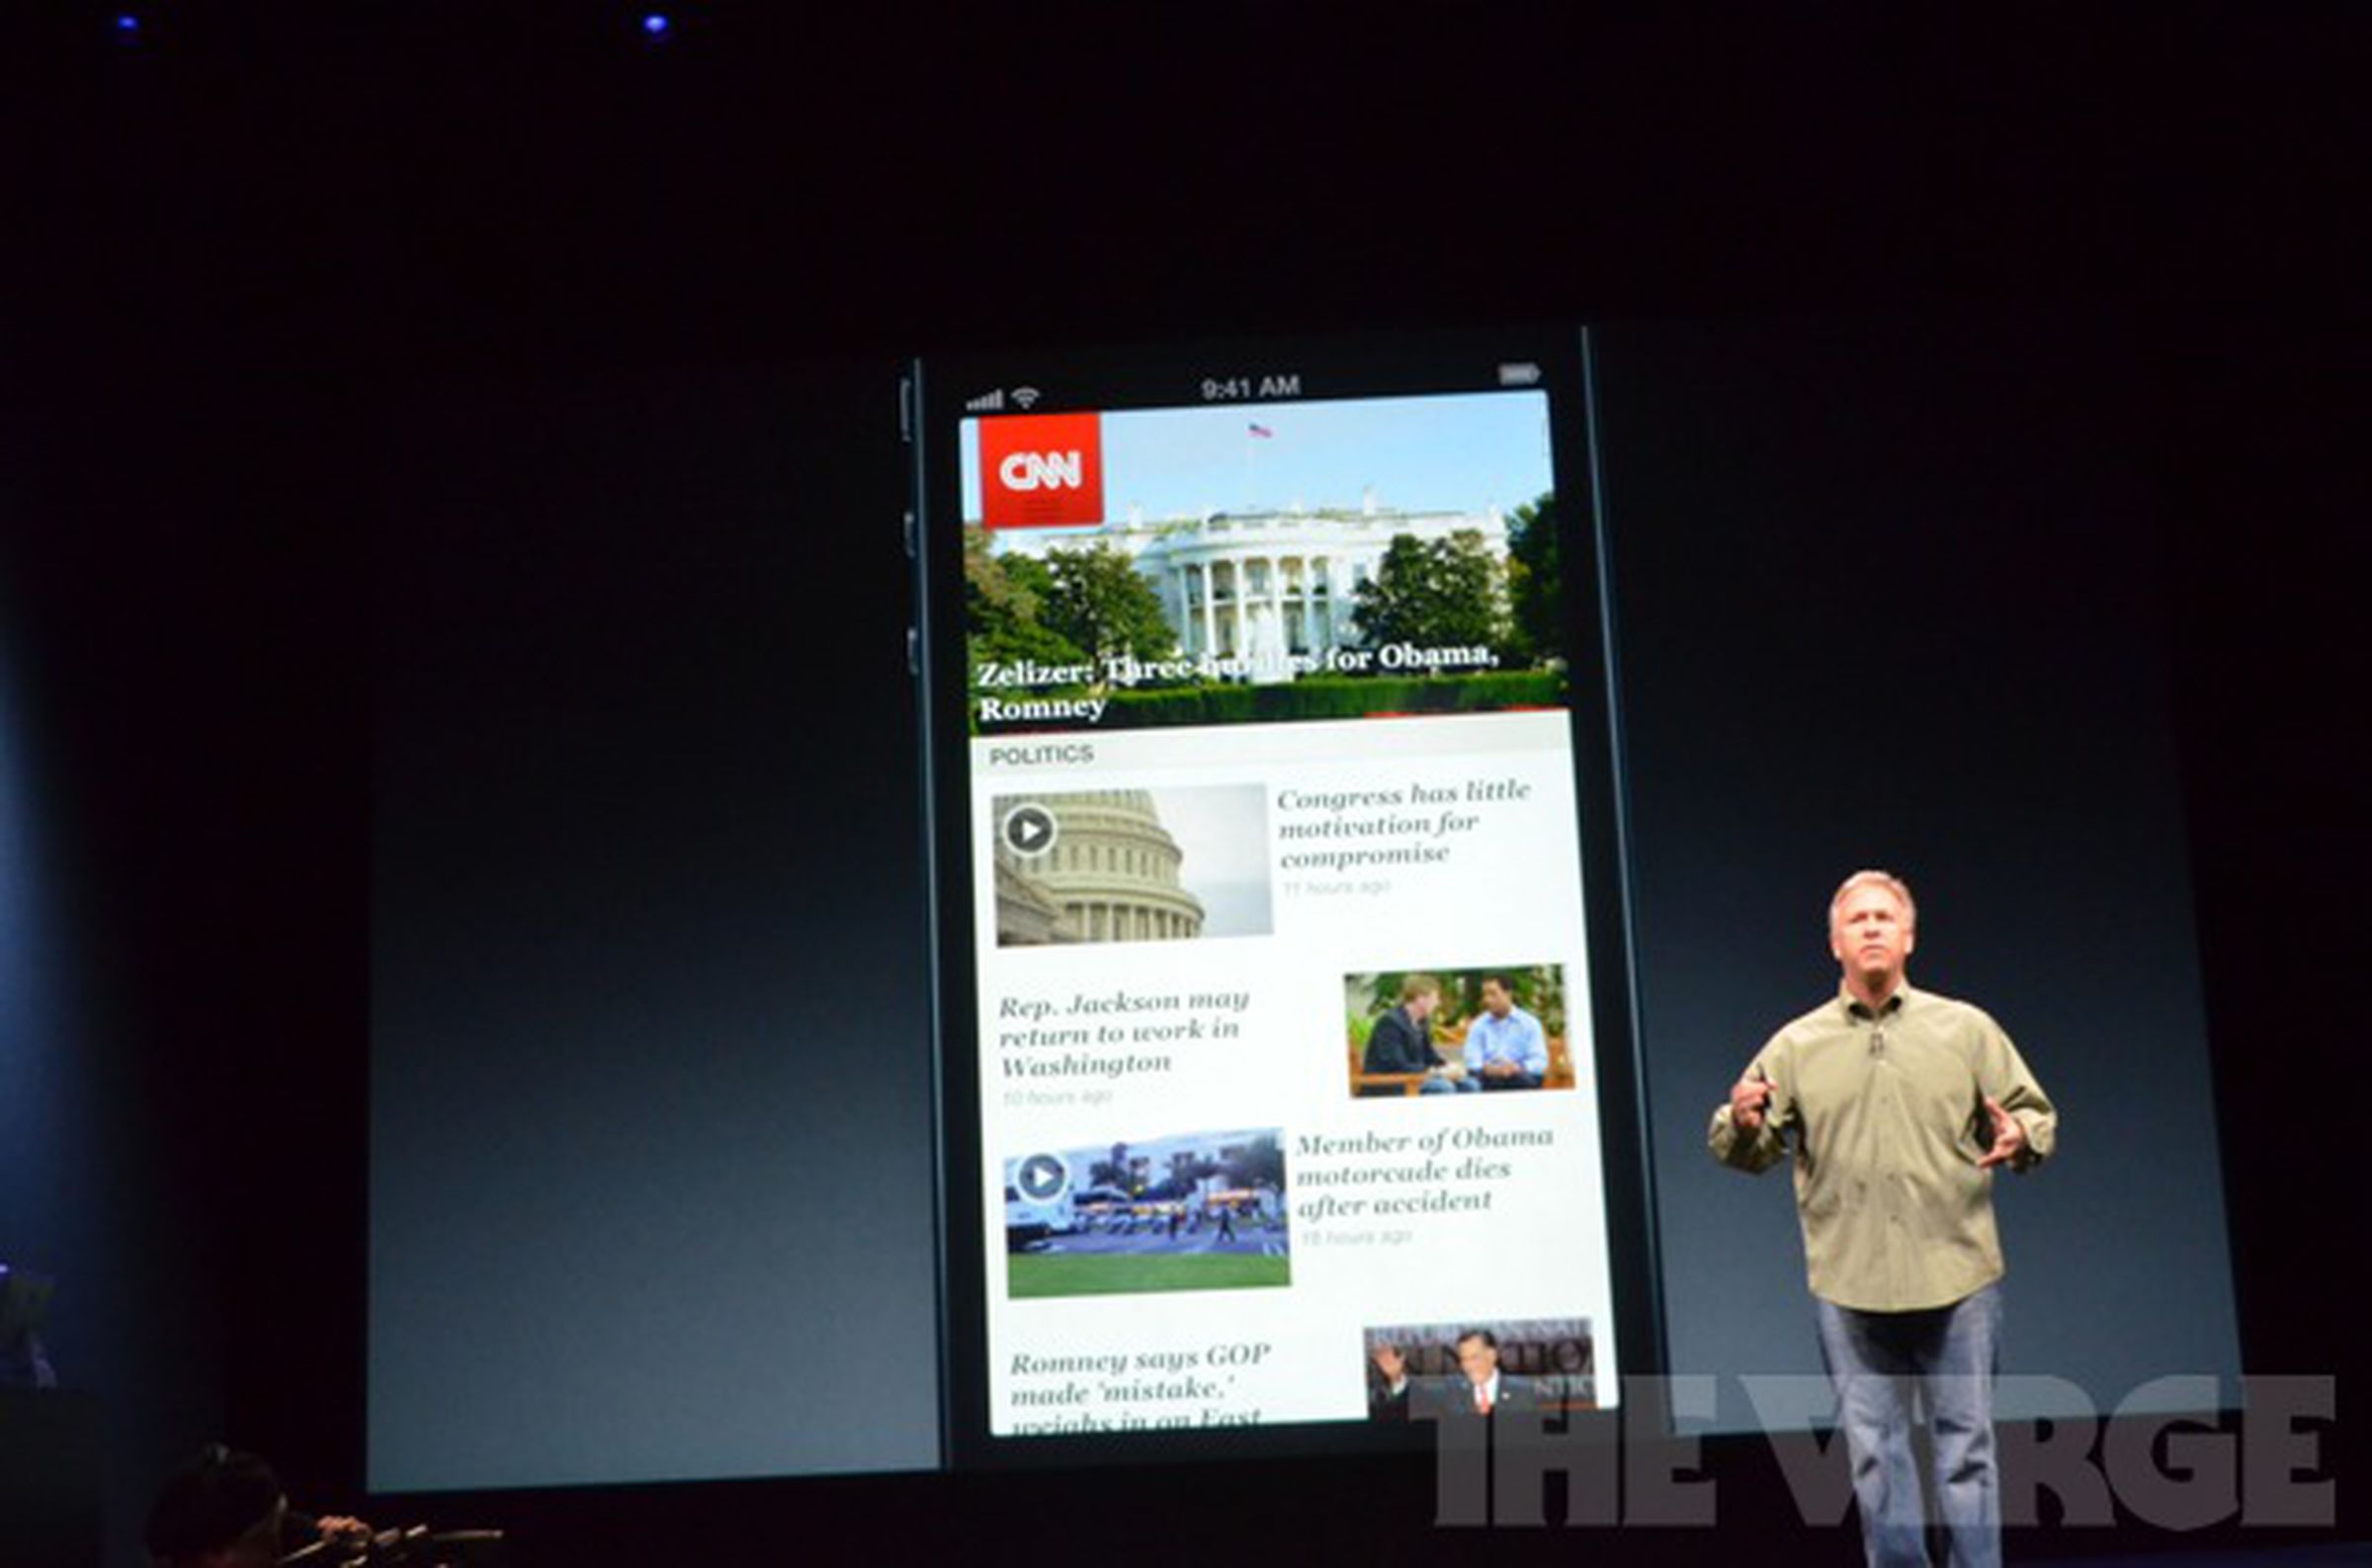 Liveblog images of optimized apps for Apple's iPhone 5